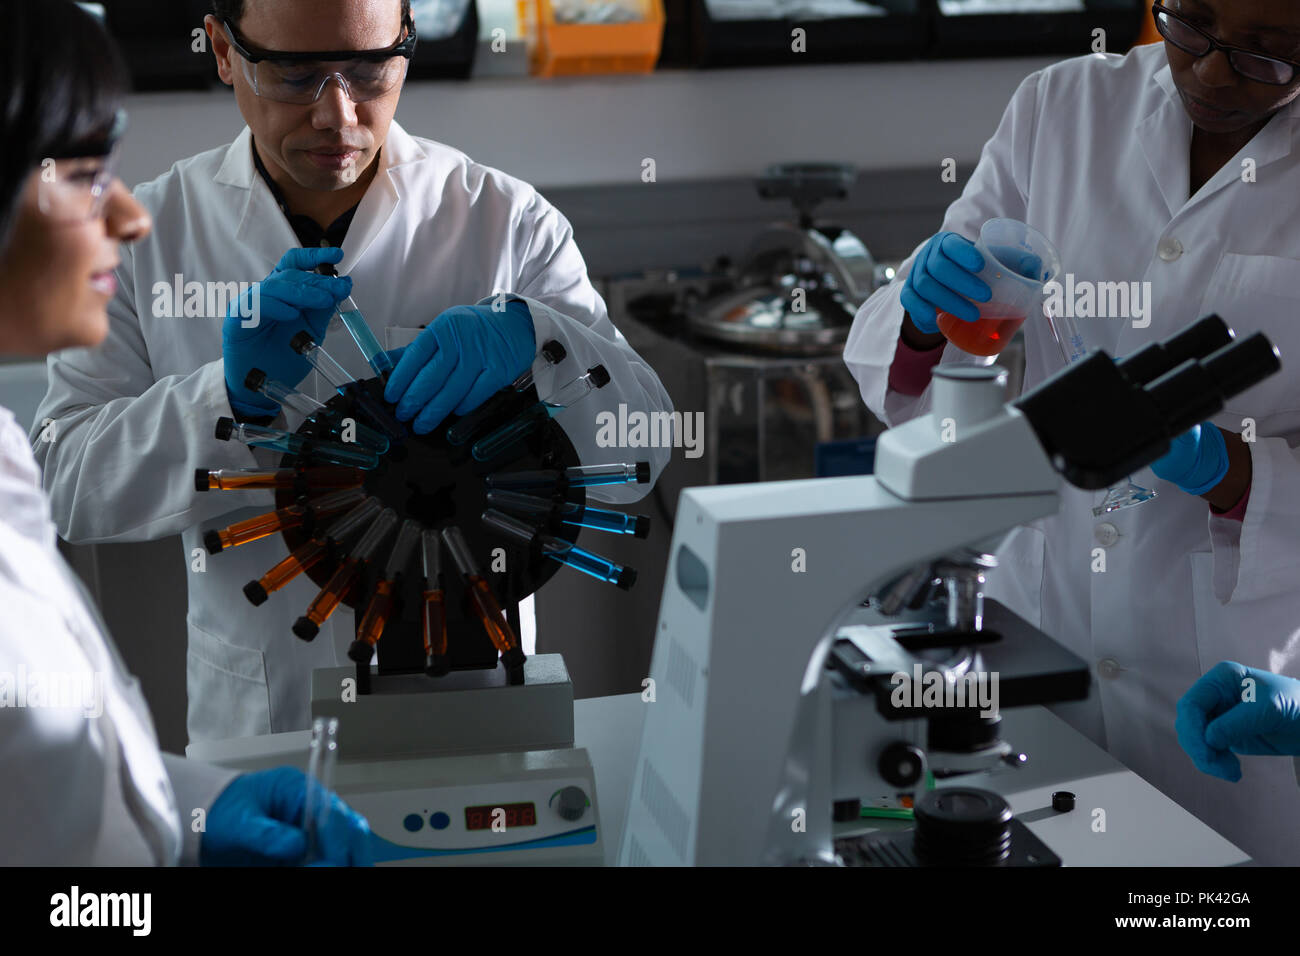 Team of scientists experimenting together Stock Photo